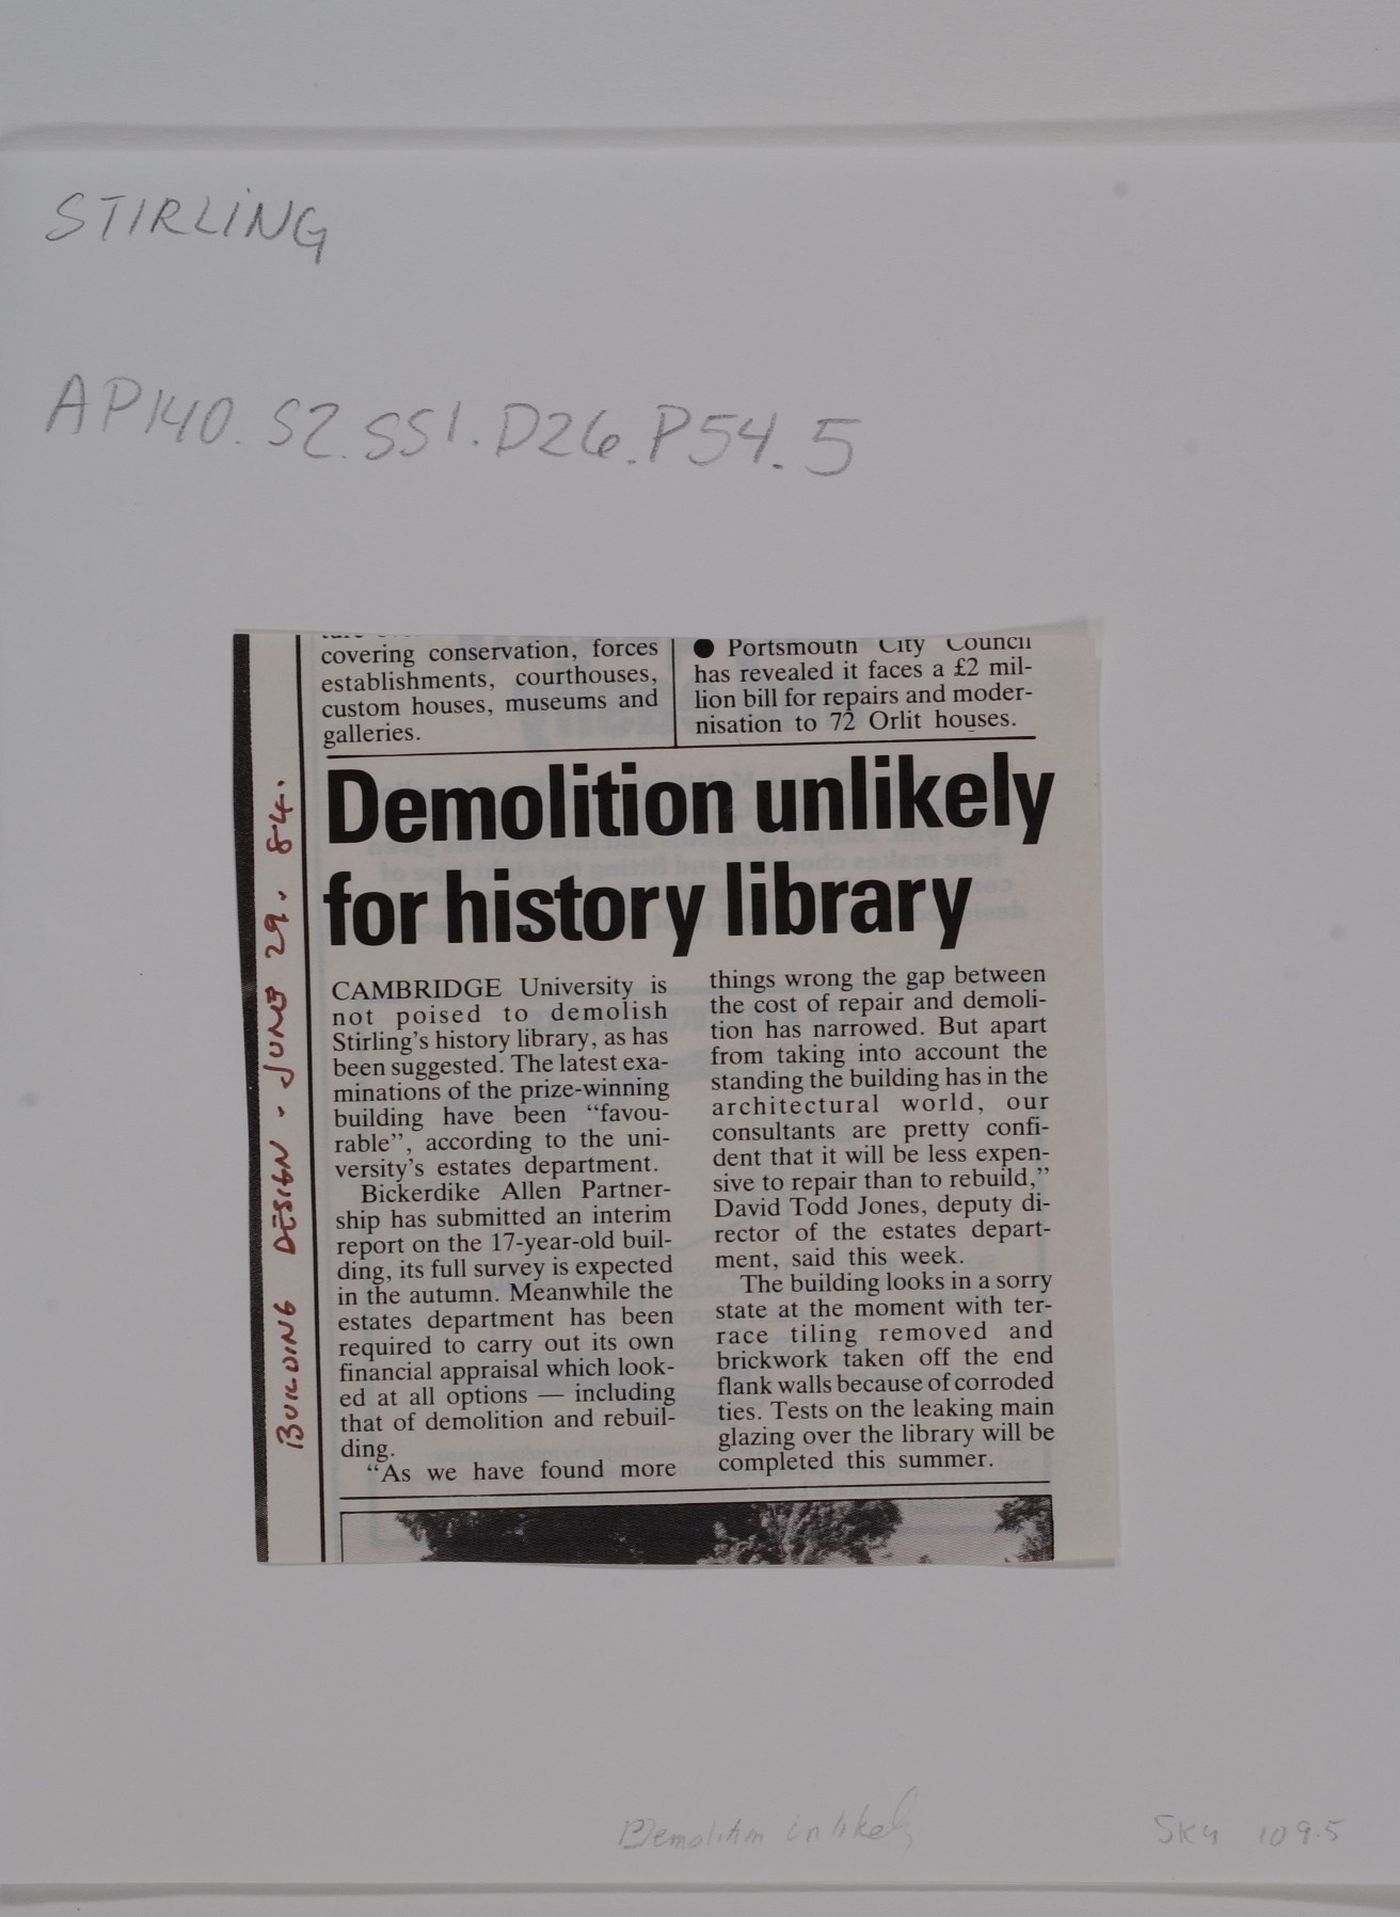 Demolition unlikely for history library